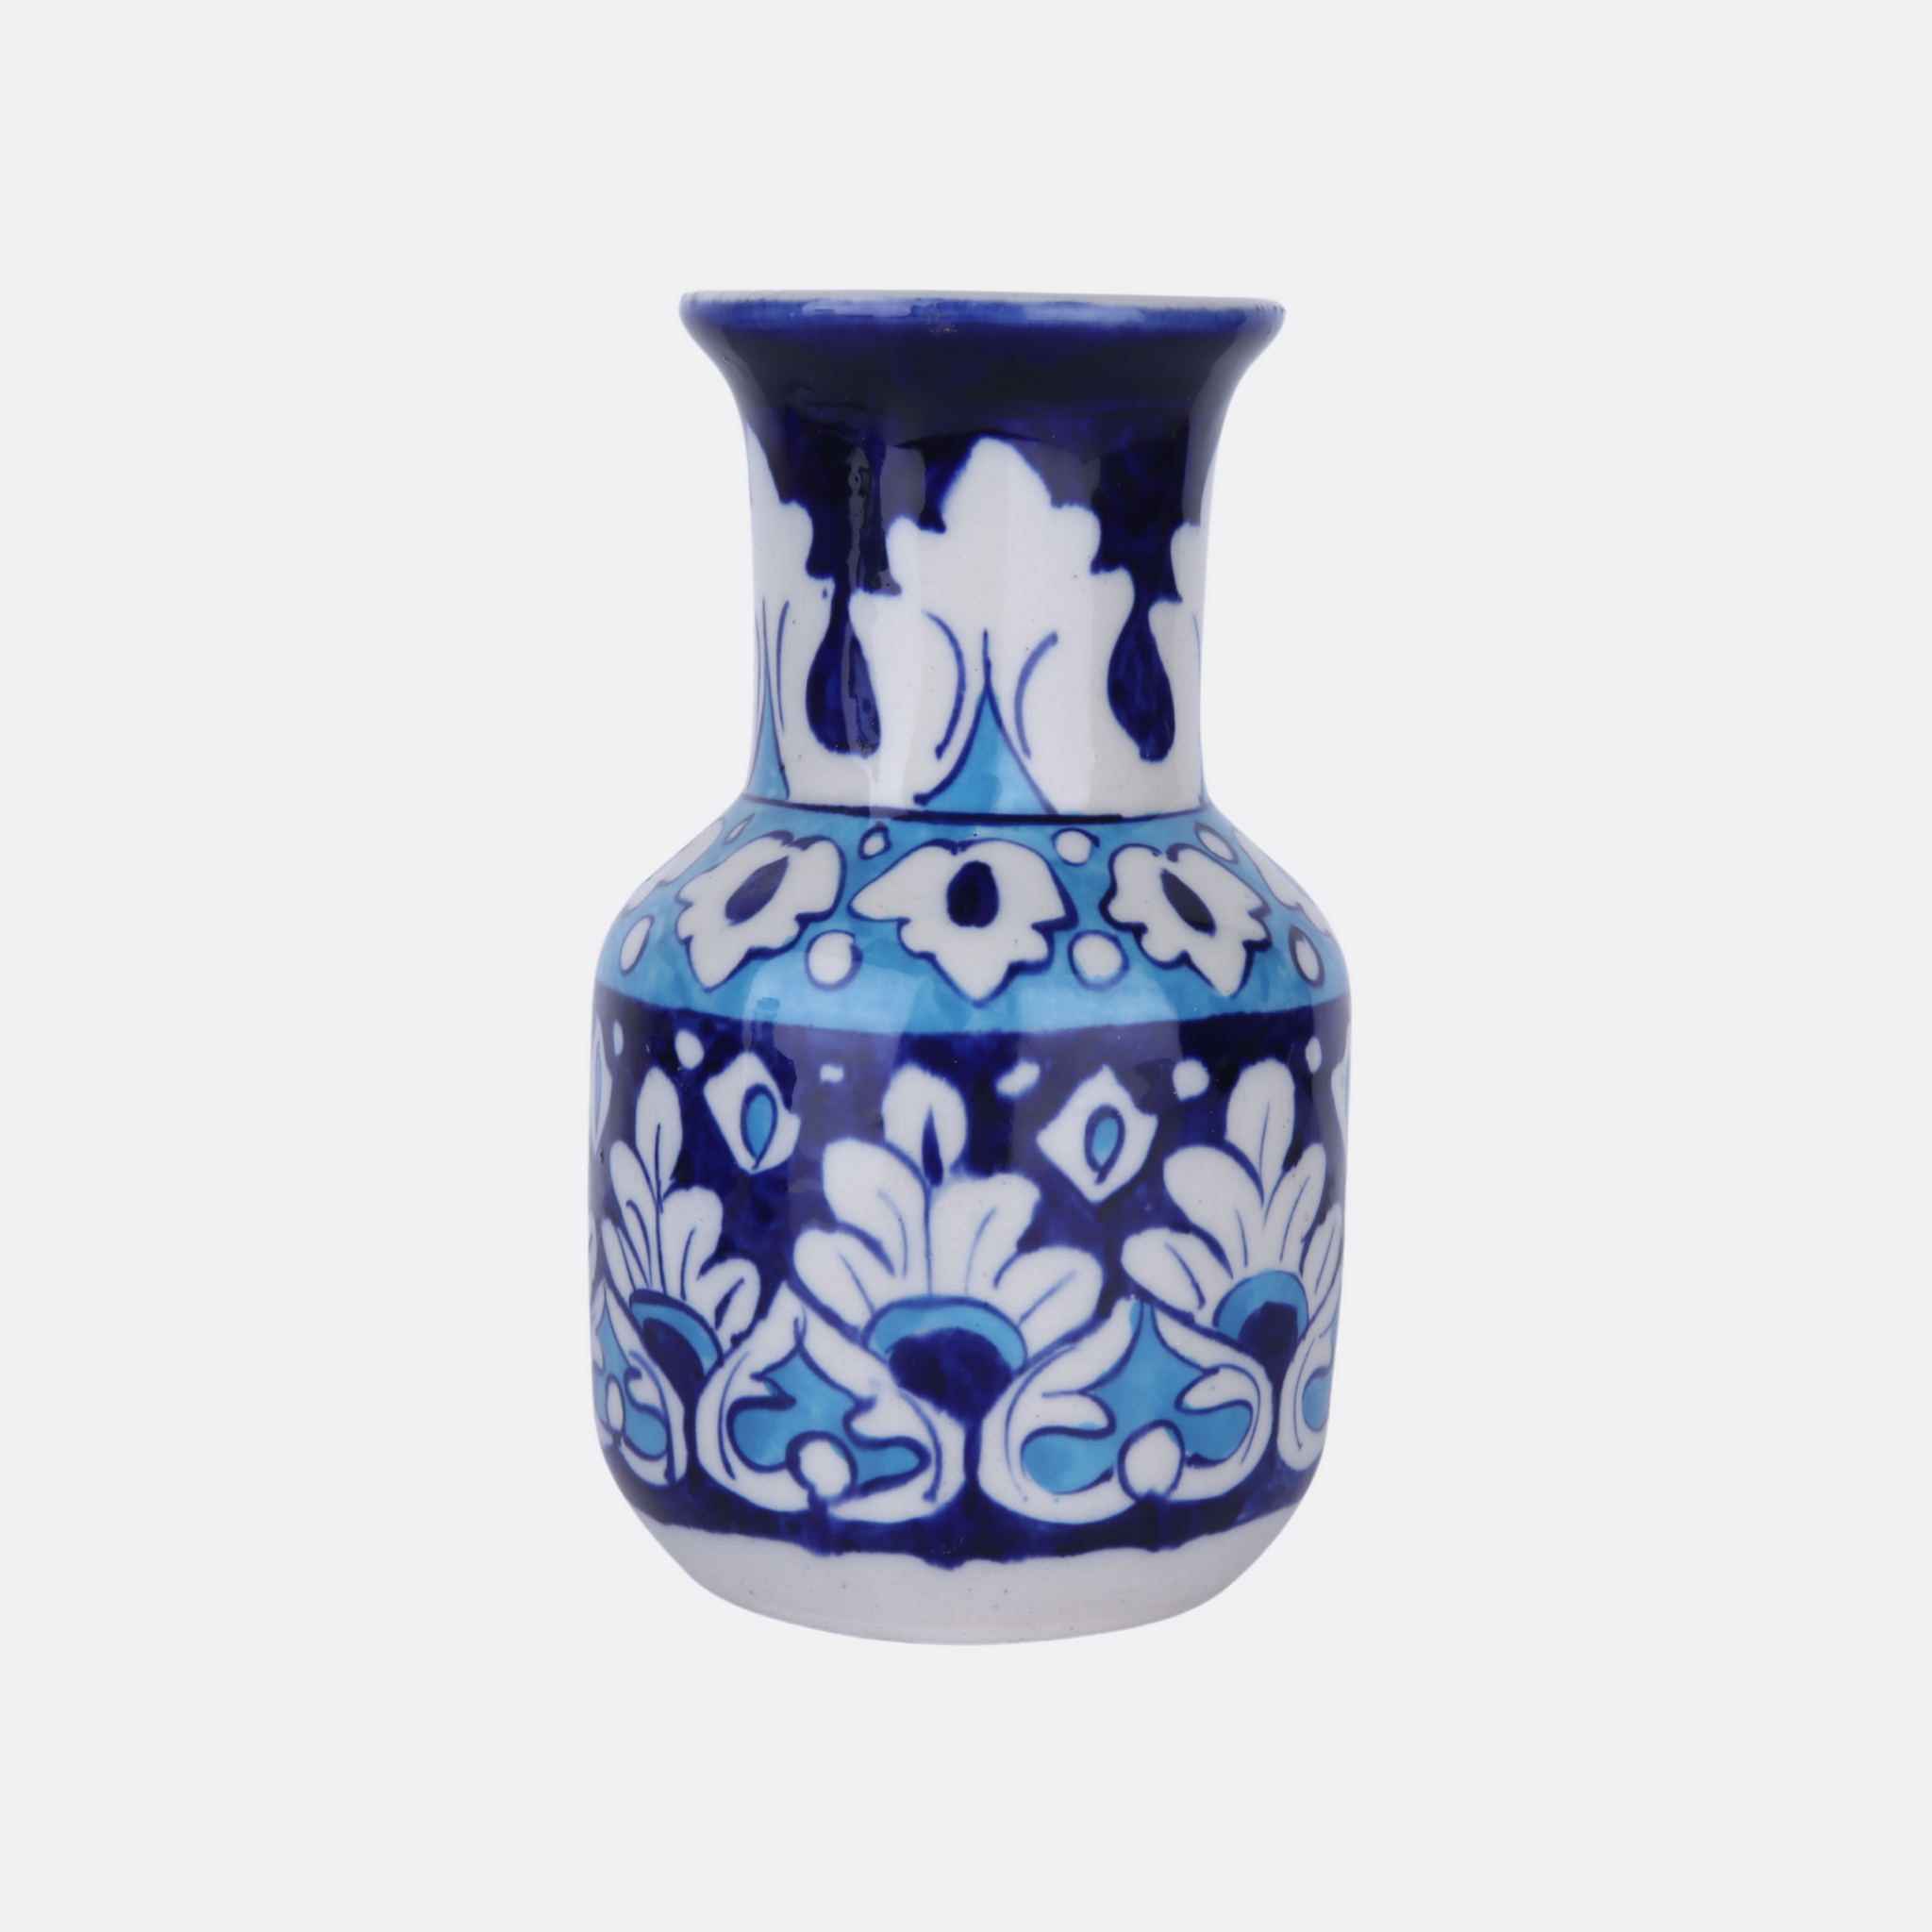 Pious Handcrafted Vase